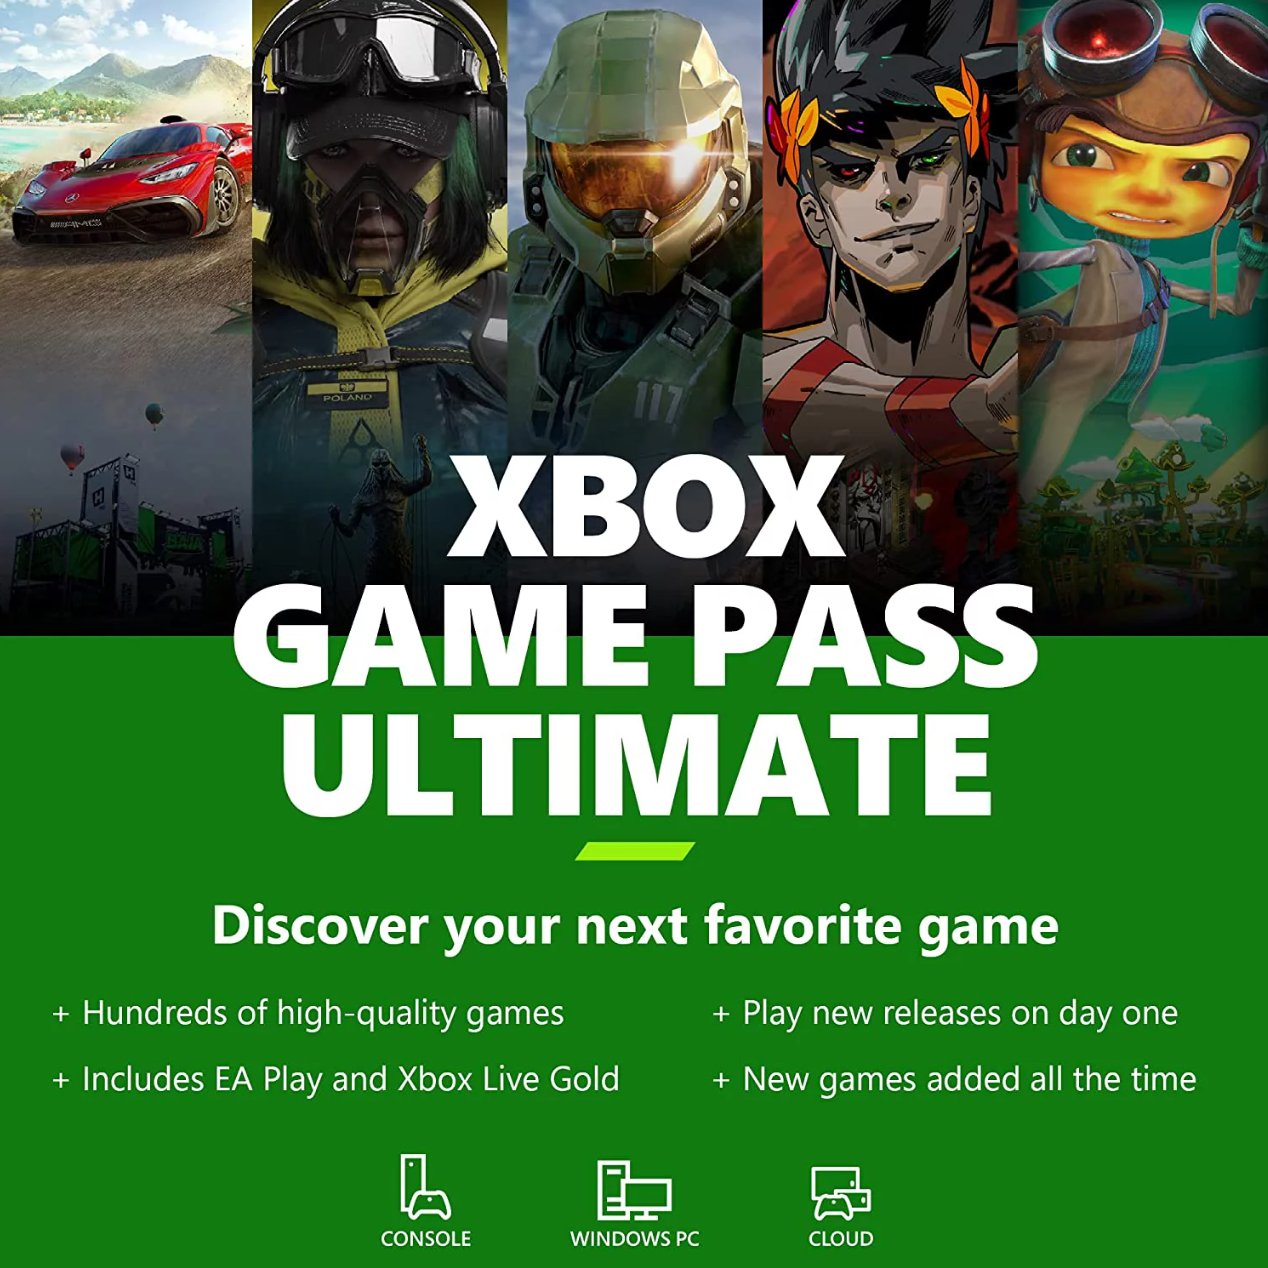 How to activate Xbox Game Pass Ultimate